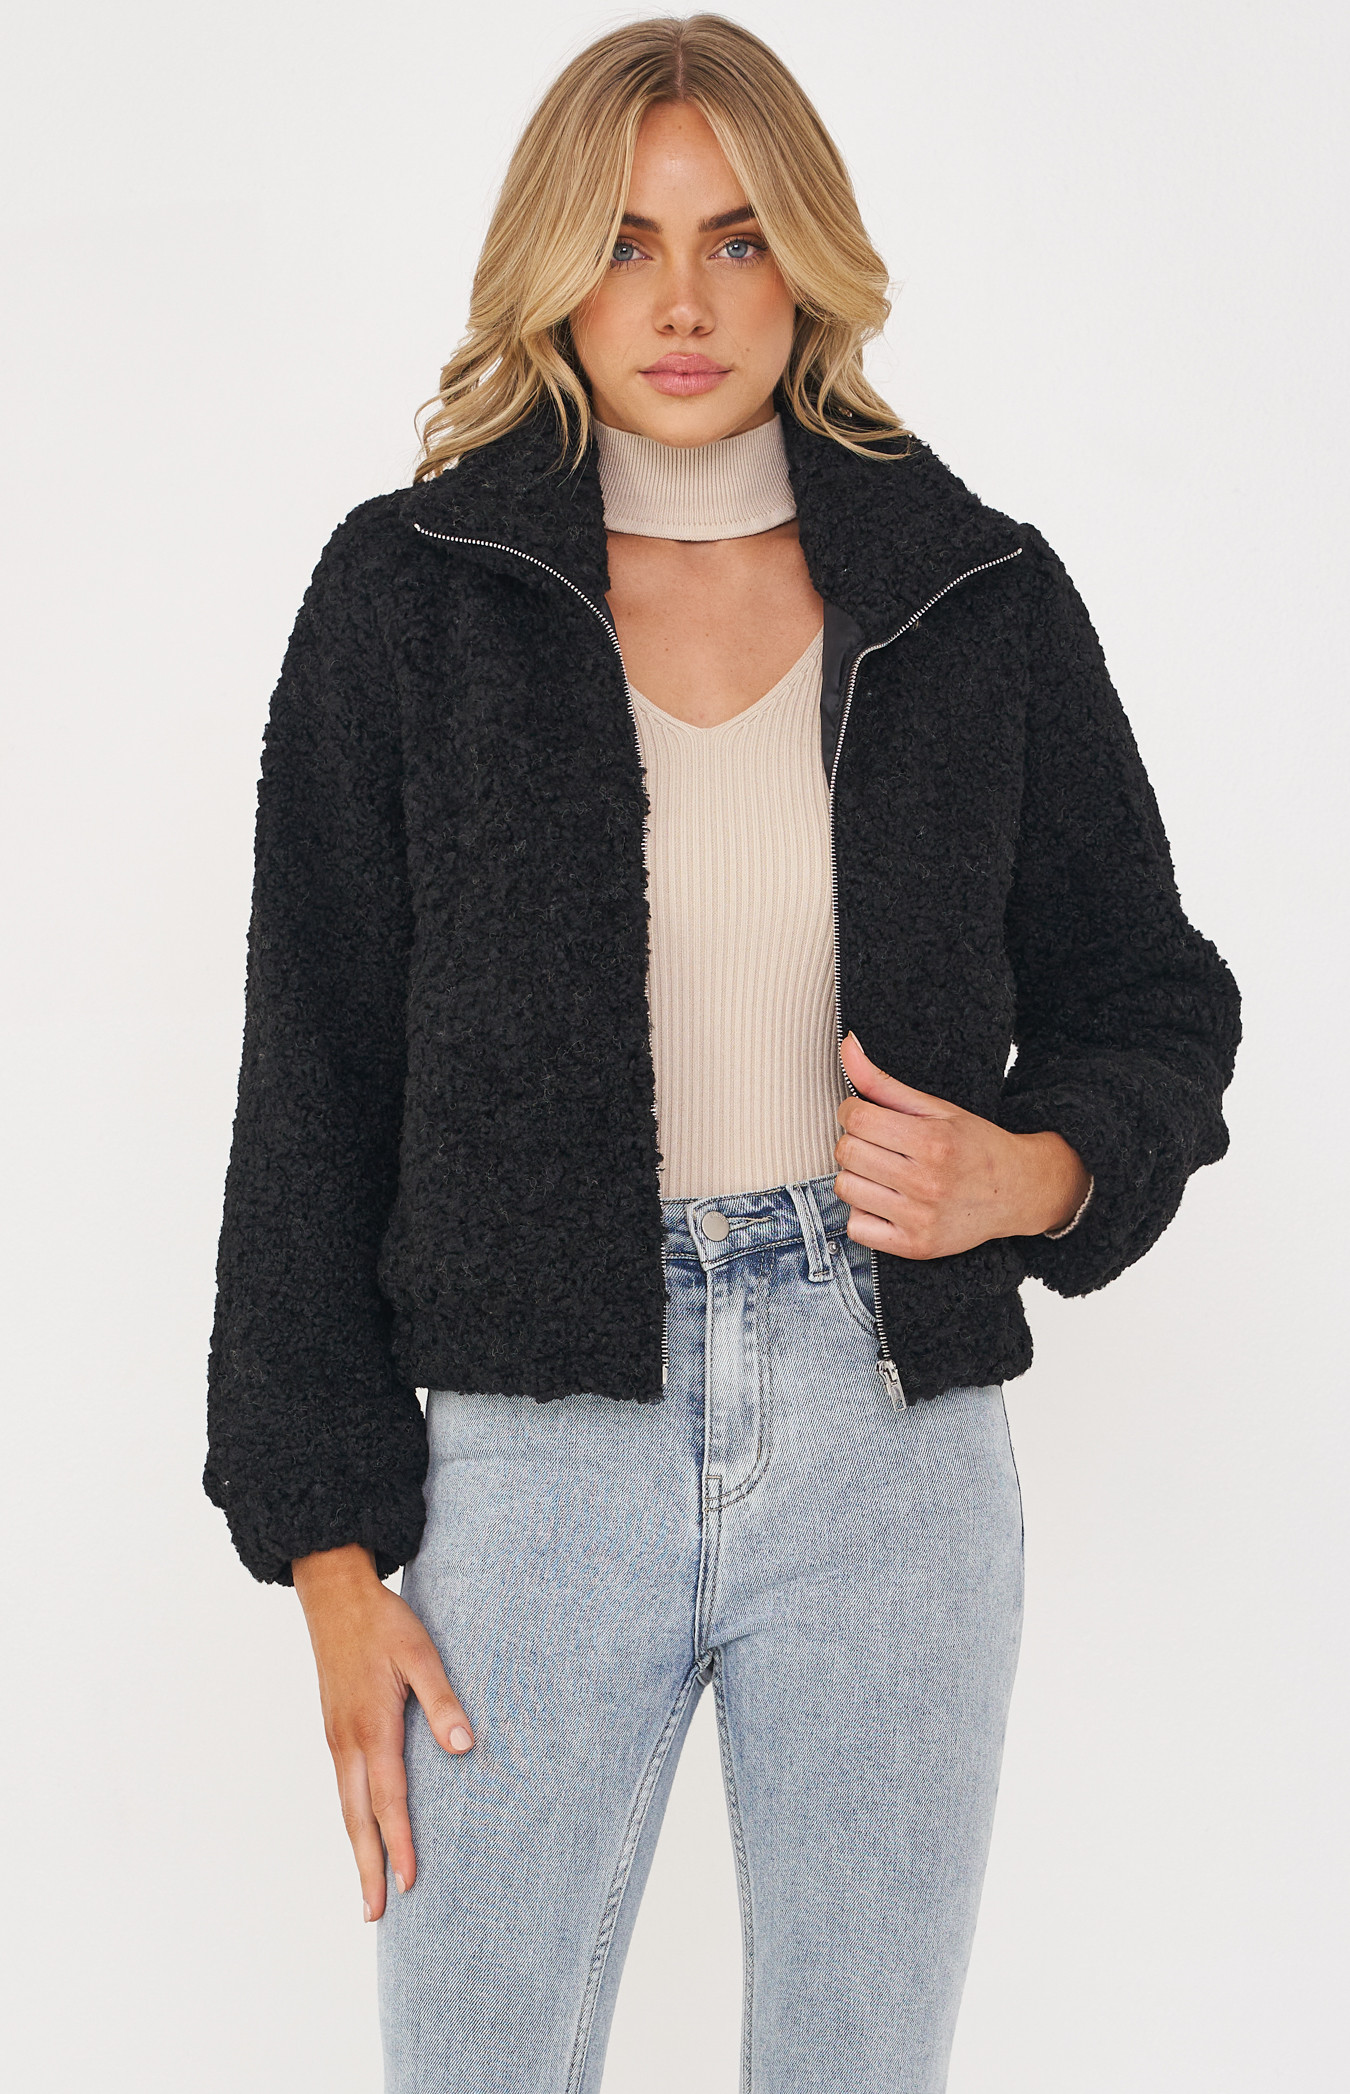 Fluffy Teddy Jacket with Functional Pockets (SJT348B)